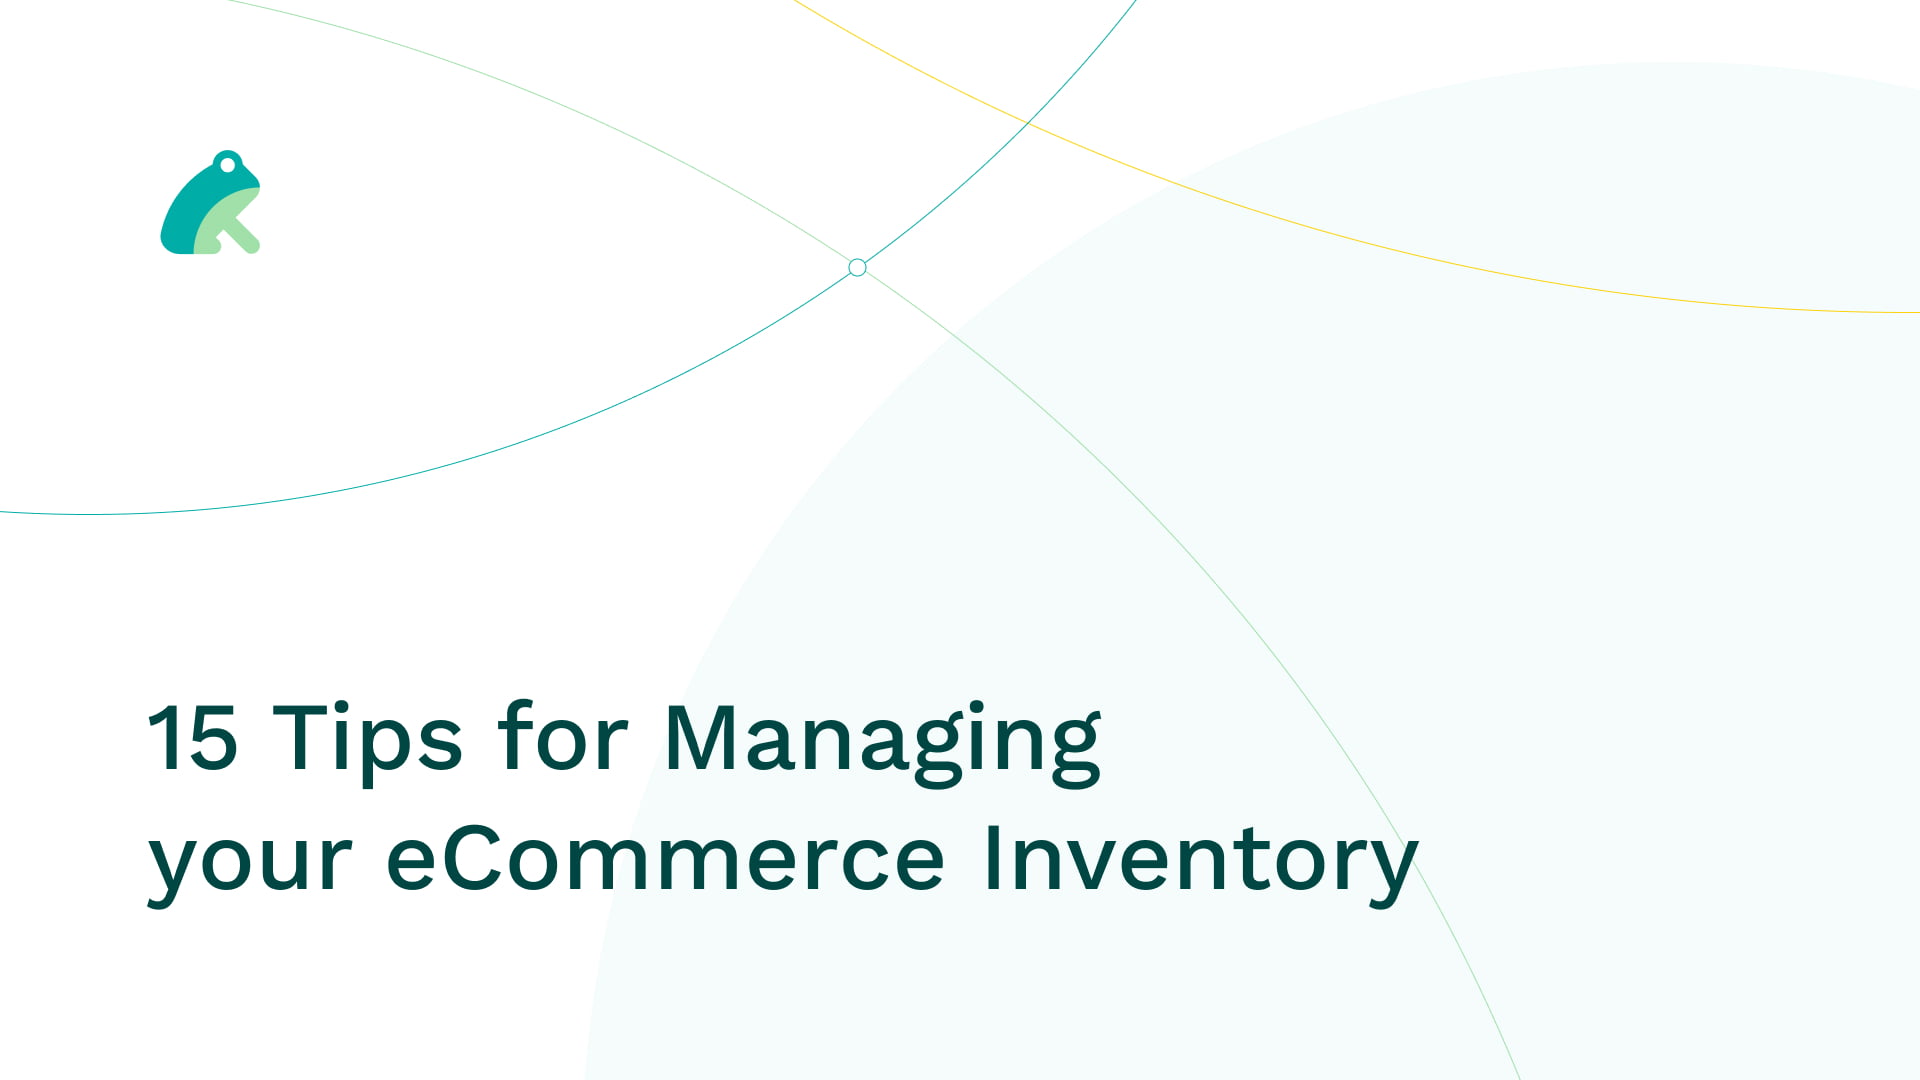 15 Tips for Managing your eCommerce Inventory